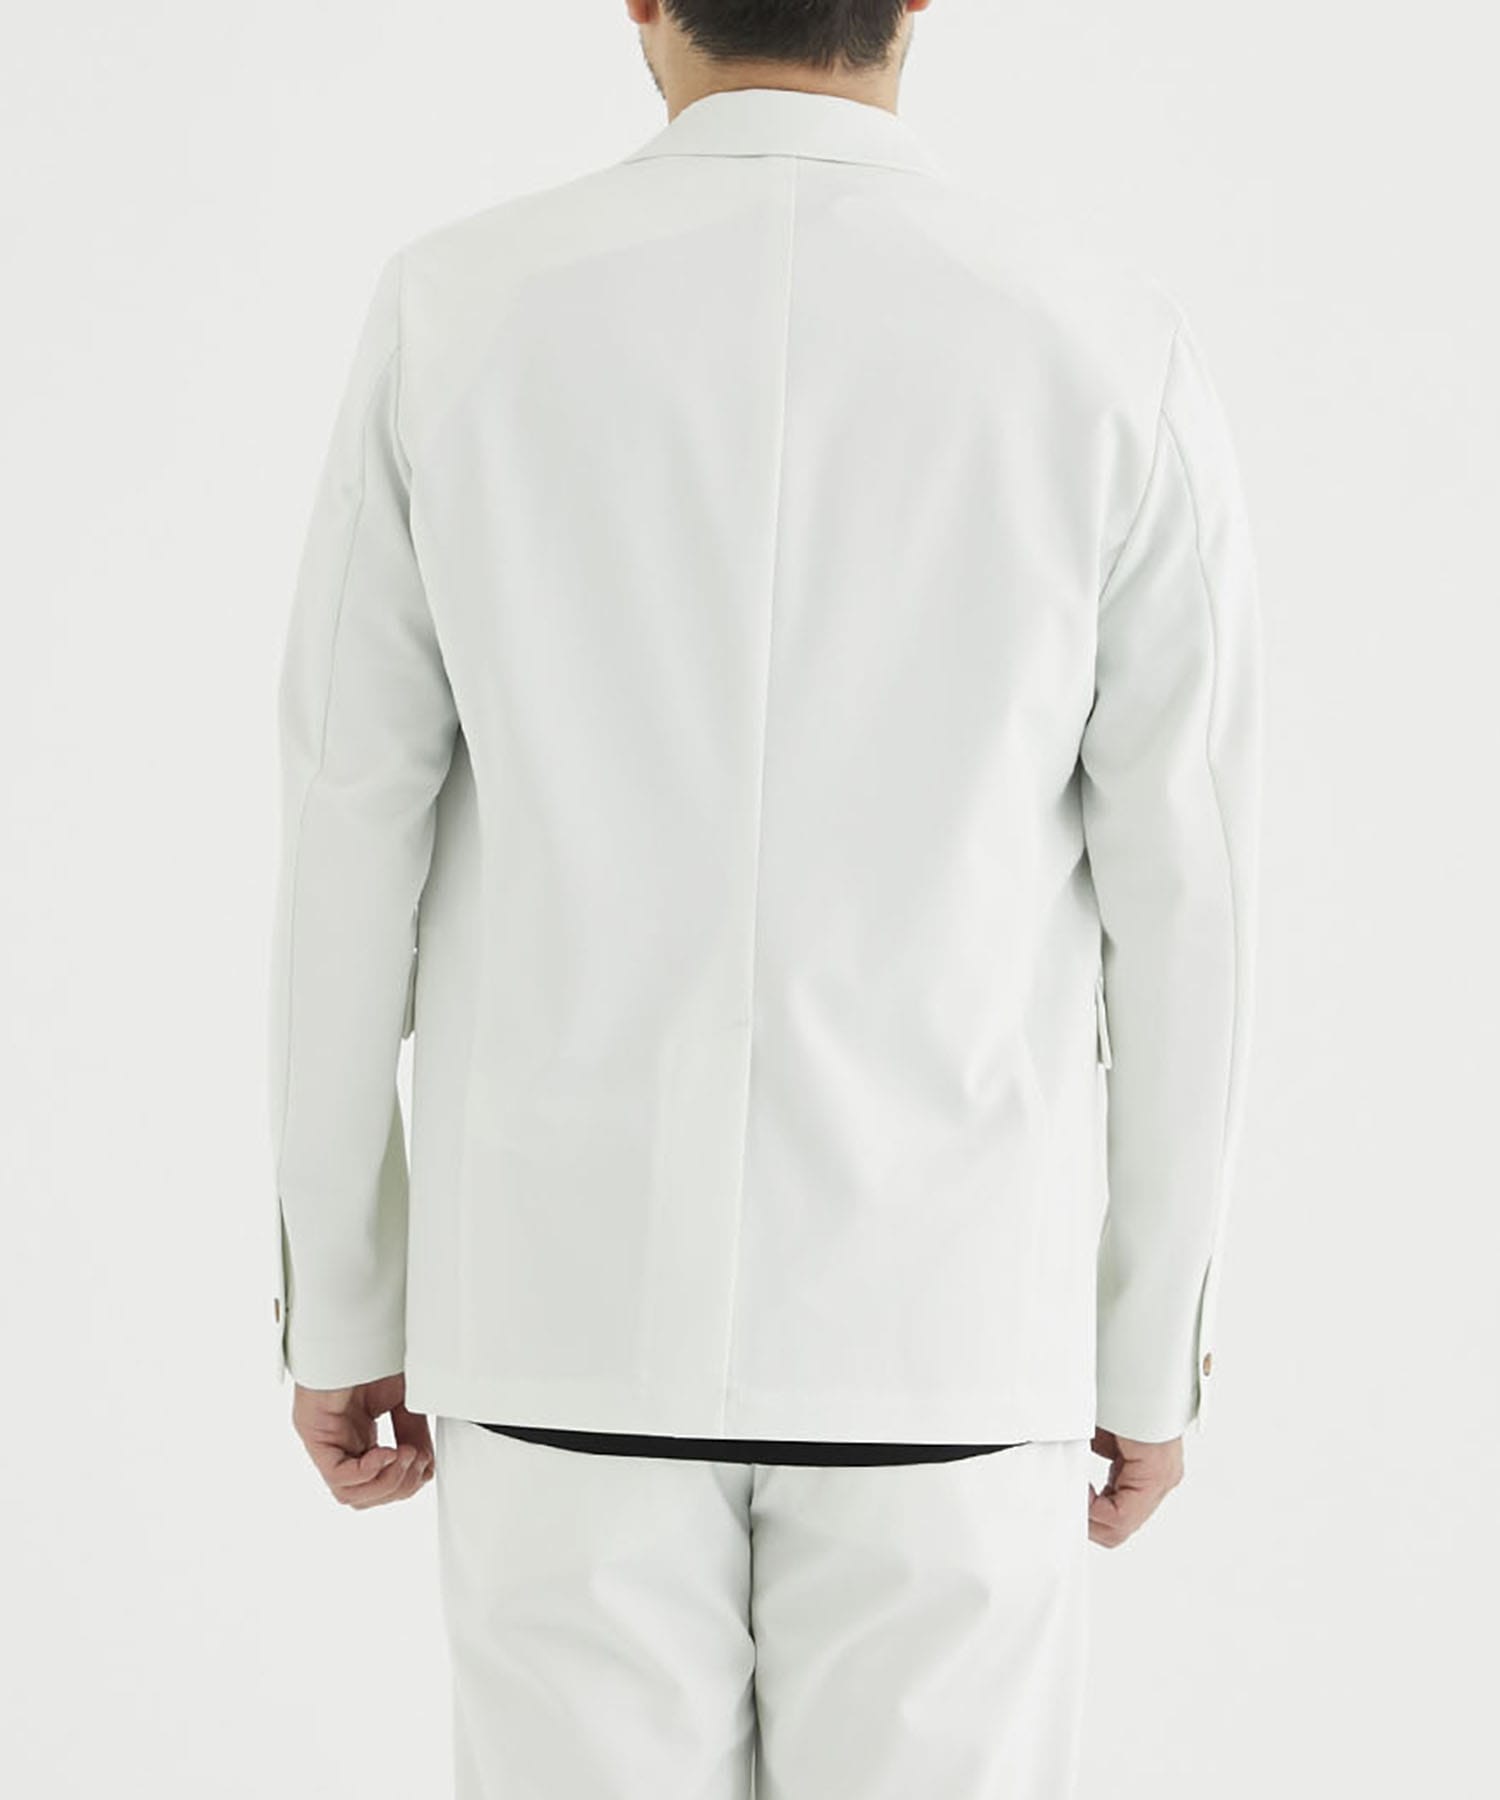 Washable High Function Jersey Shape Jacket(44 WHITE): THE TOKYO